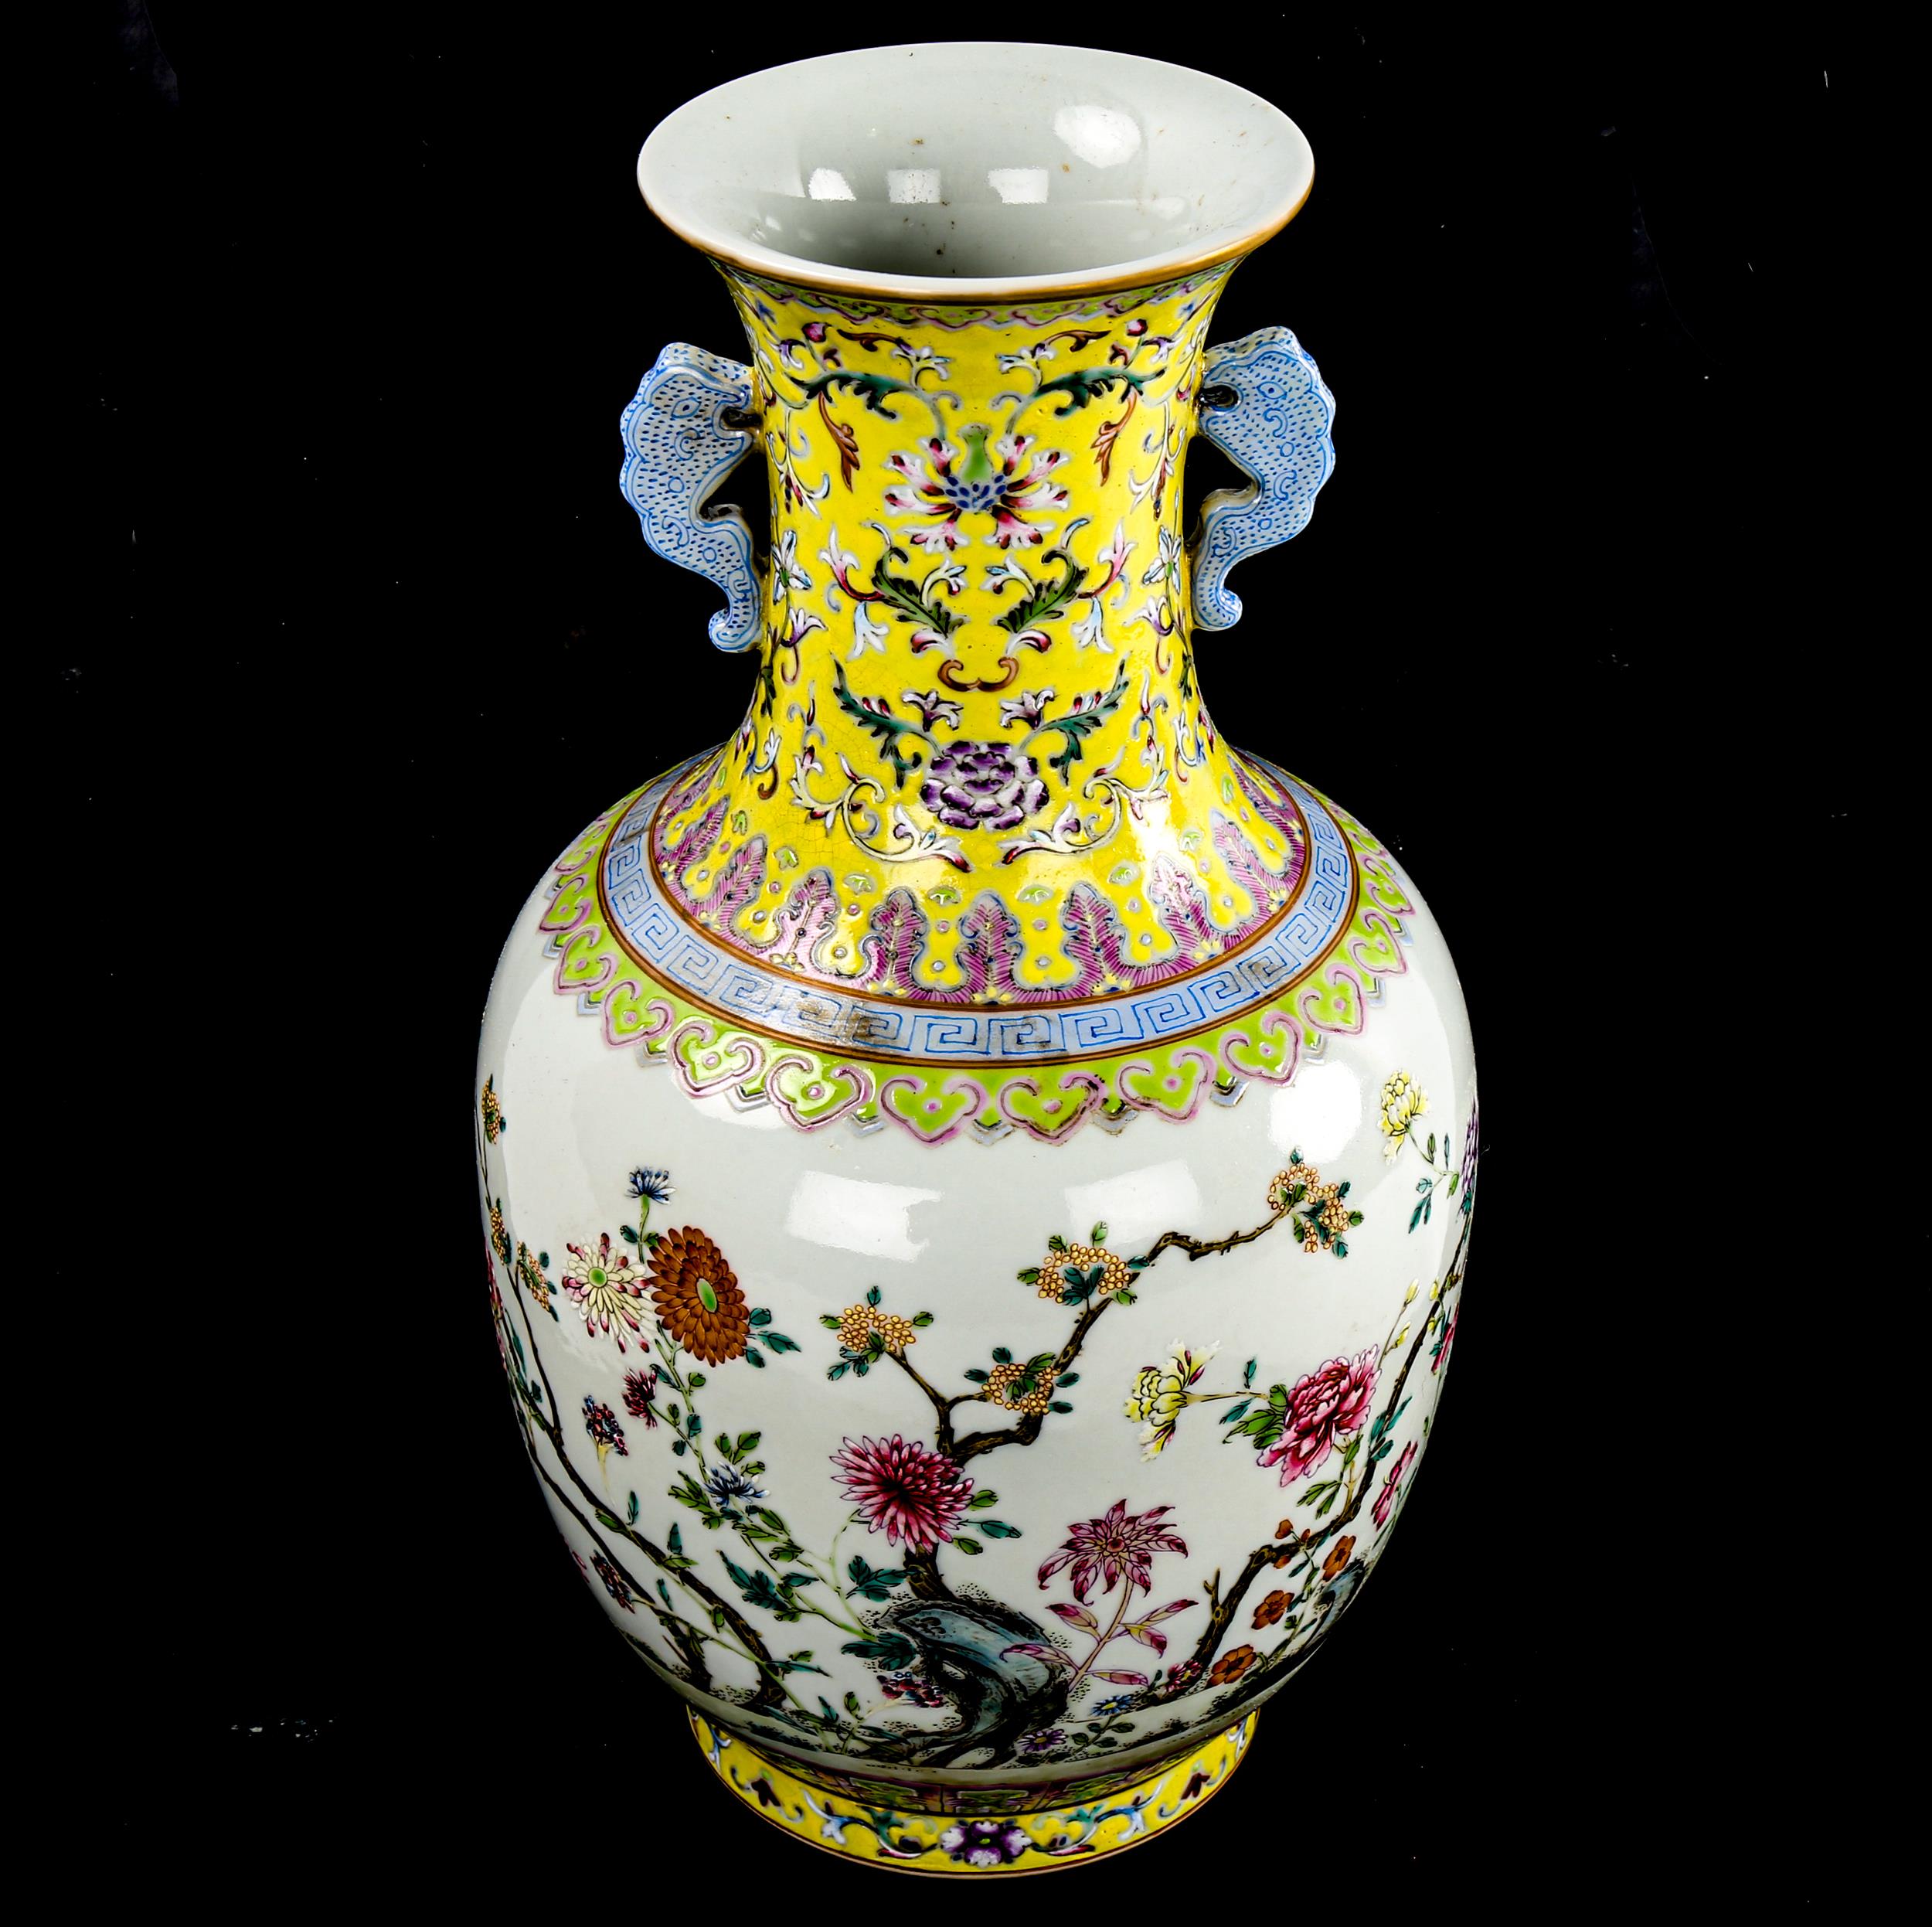 A Chinese white glaze porcelain vase, finely painted enamel flowers with yellow ground neck, seal